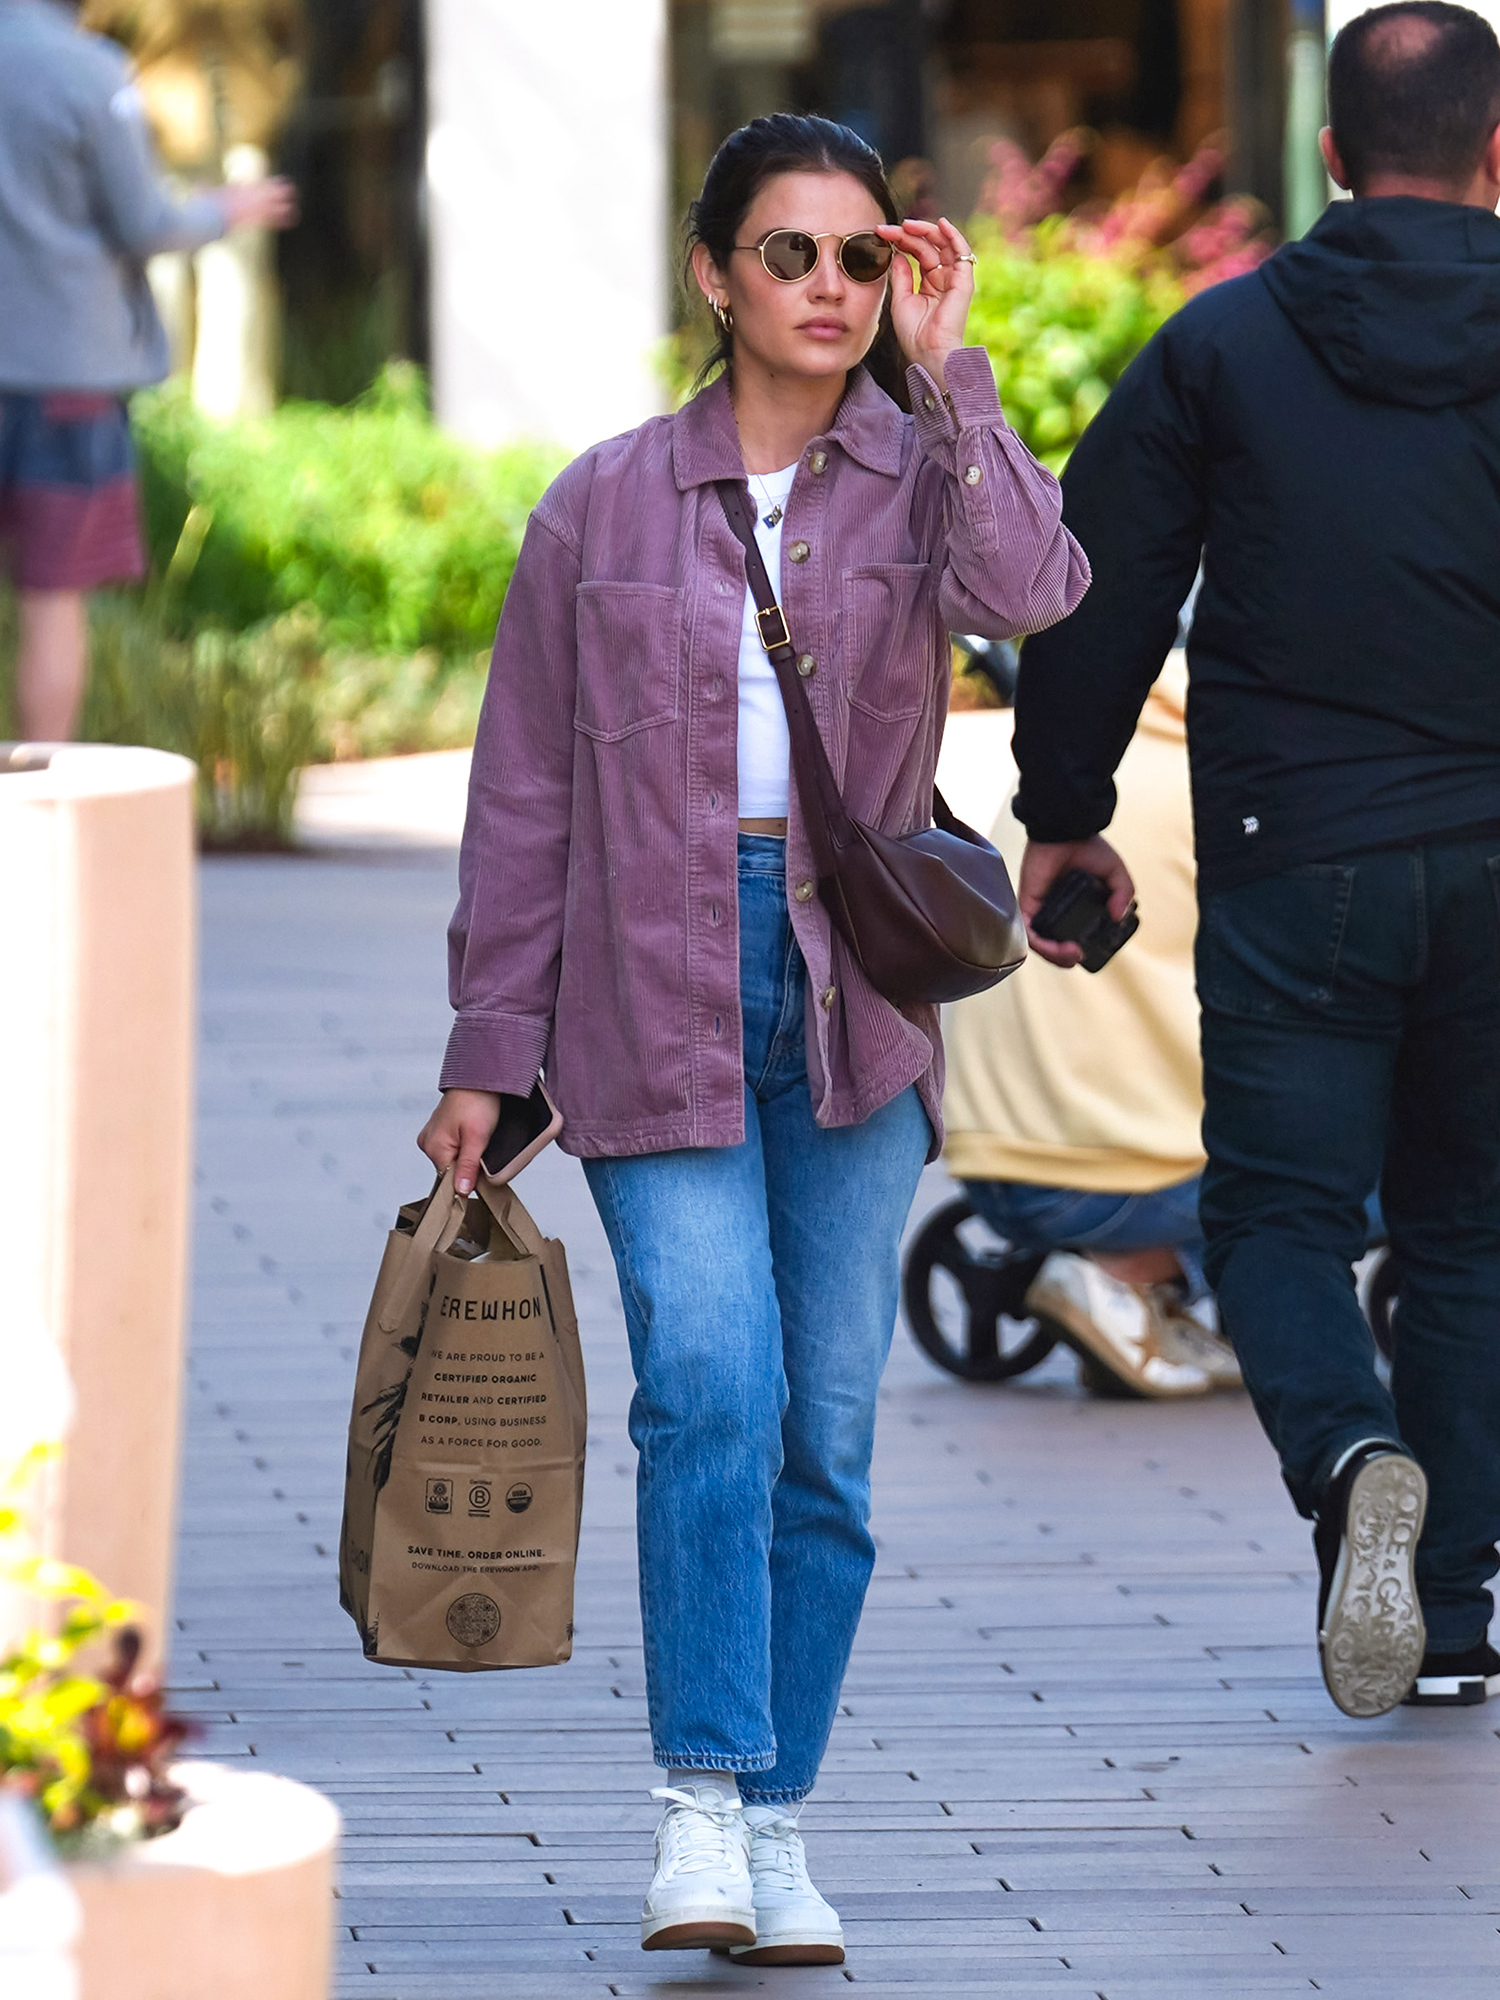 Lucy Hale looks cute in a crop top and jeans while she drops off a package